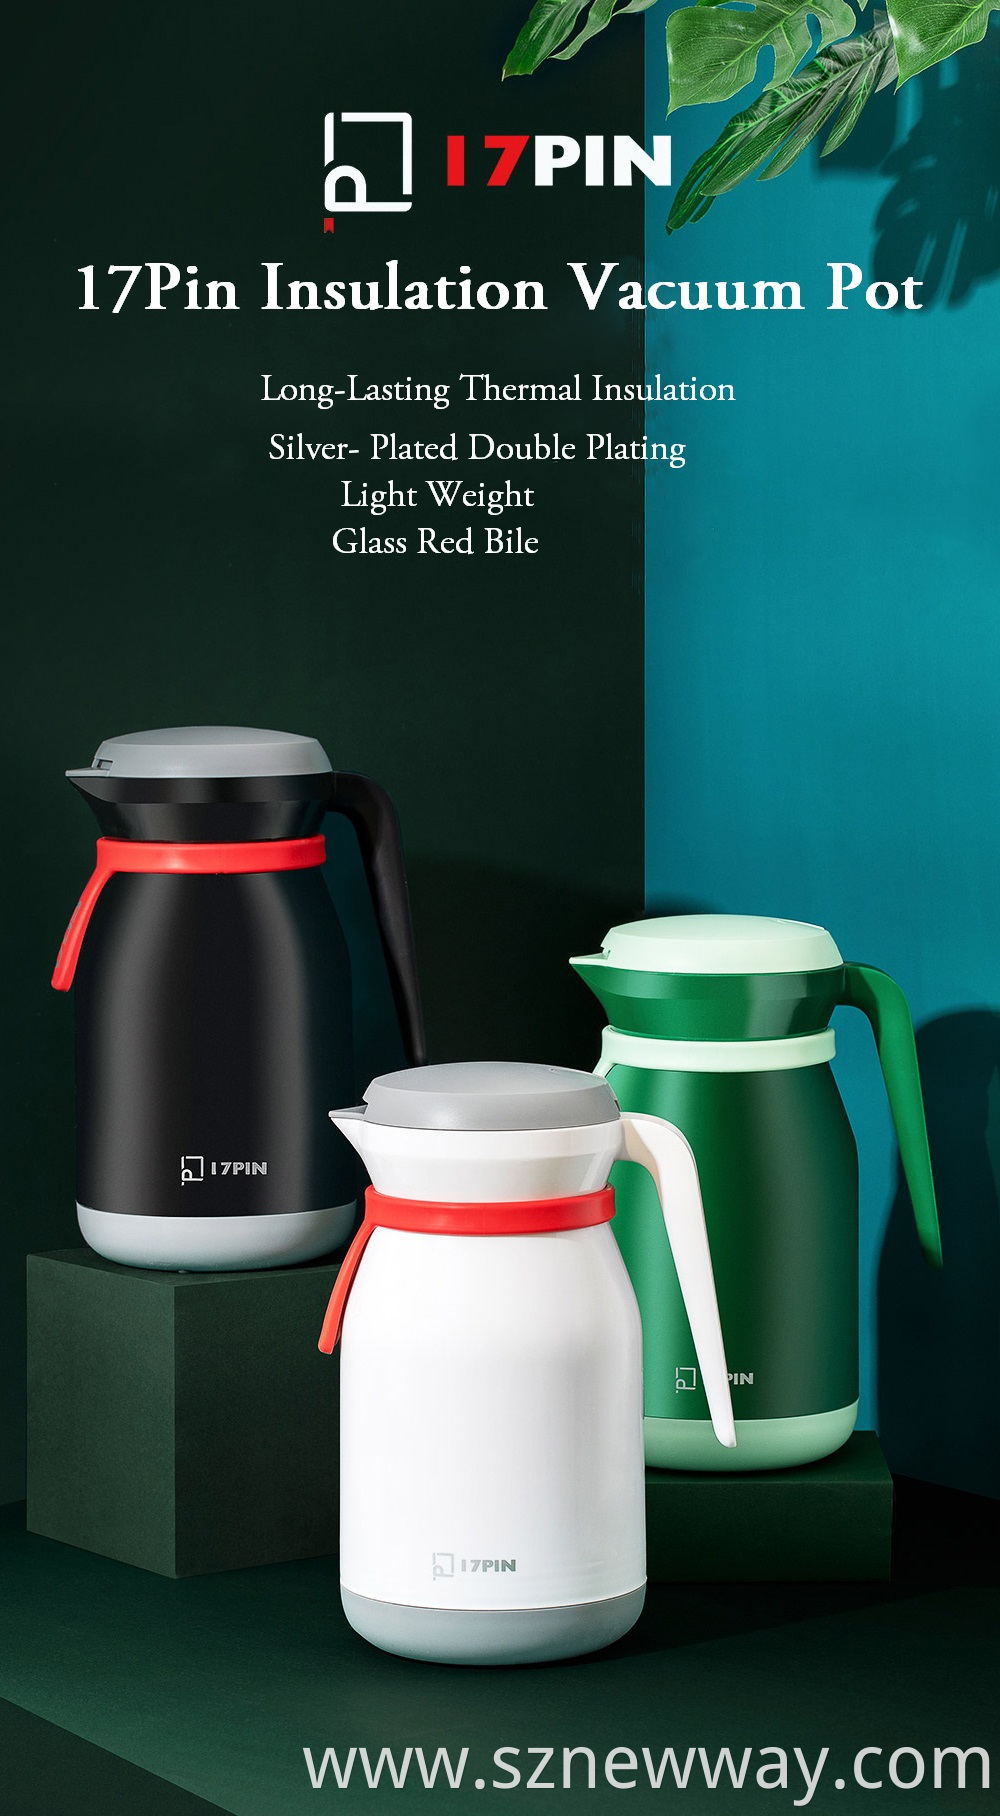 17pin Electric Kettle